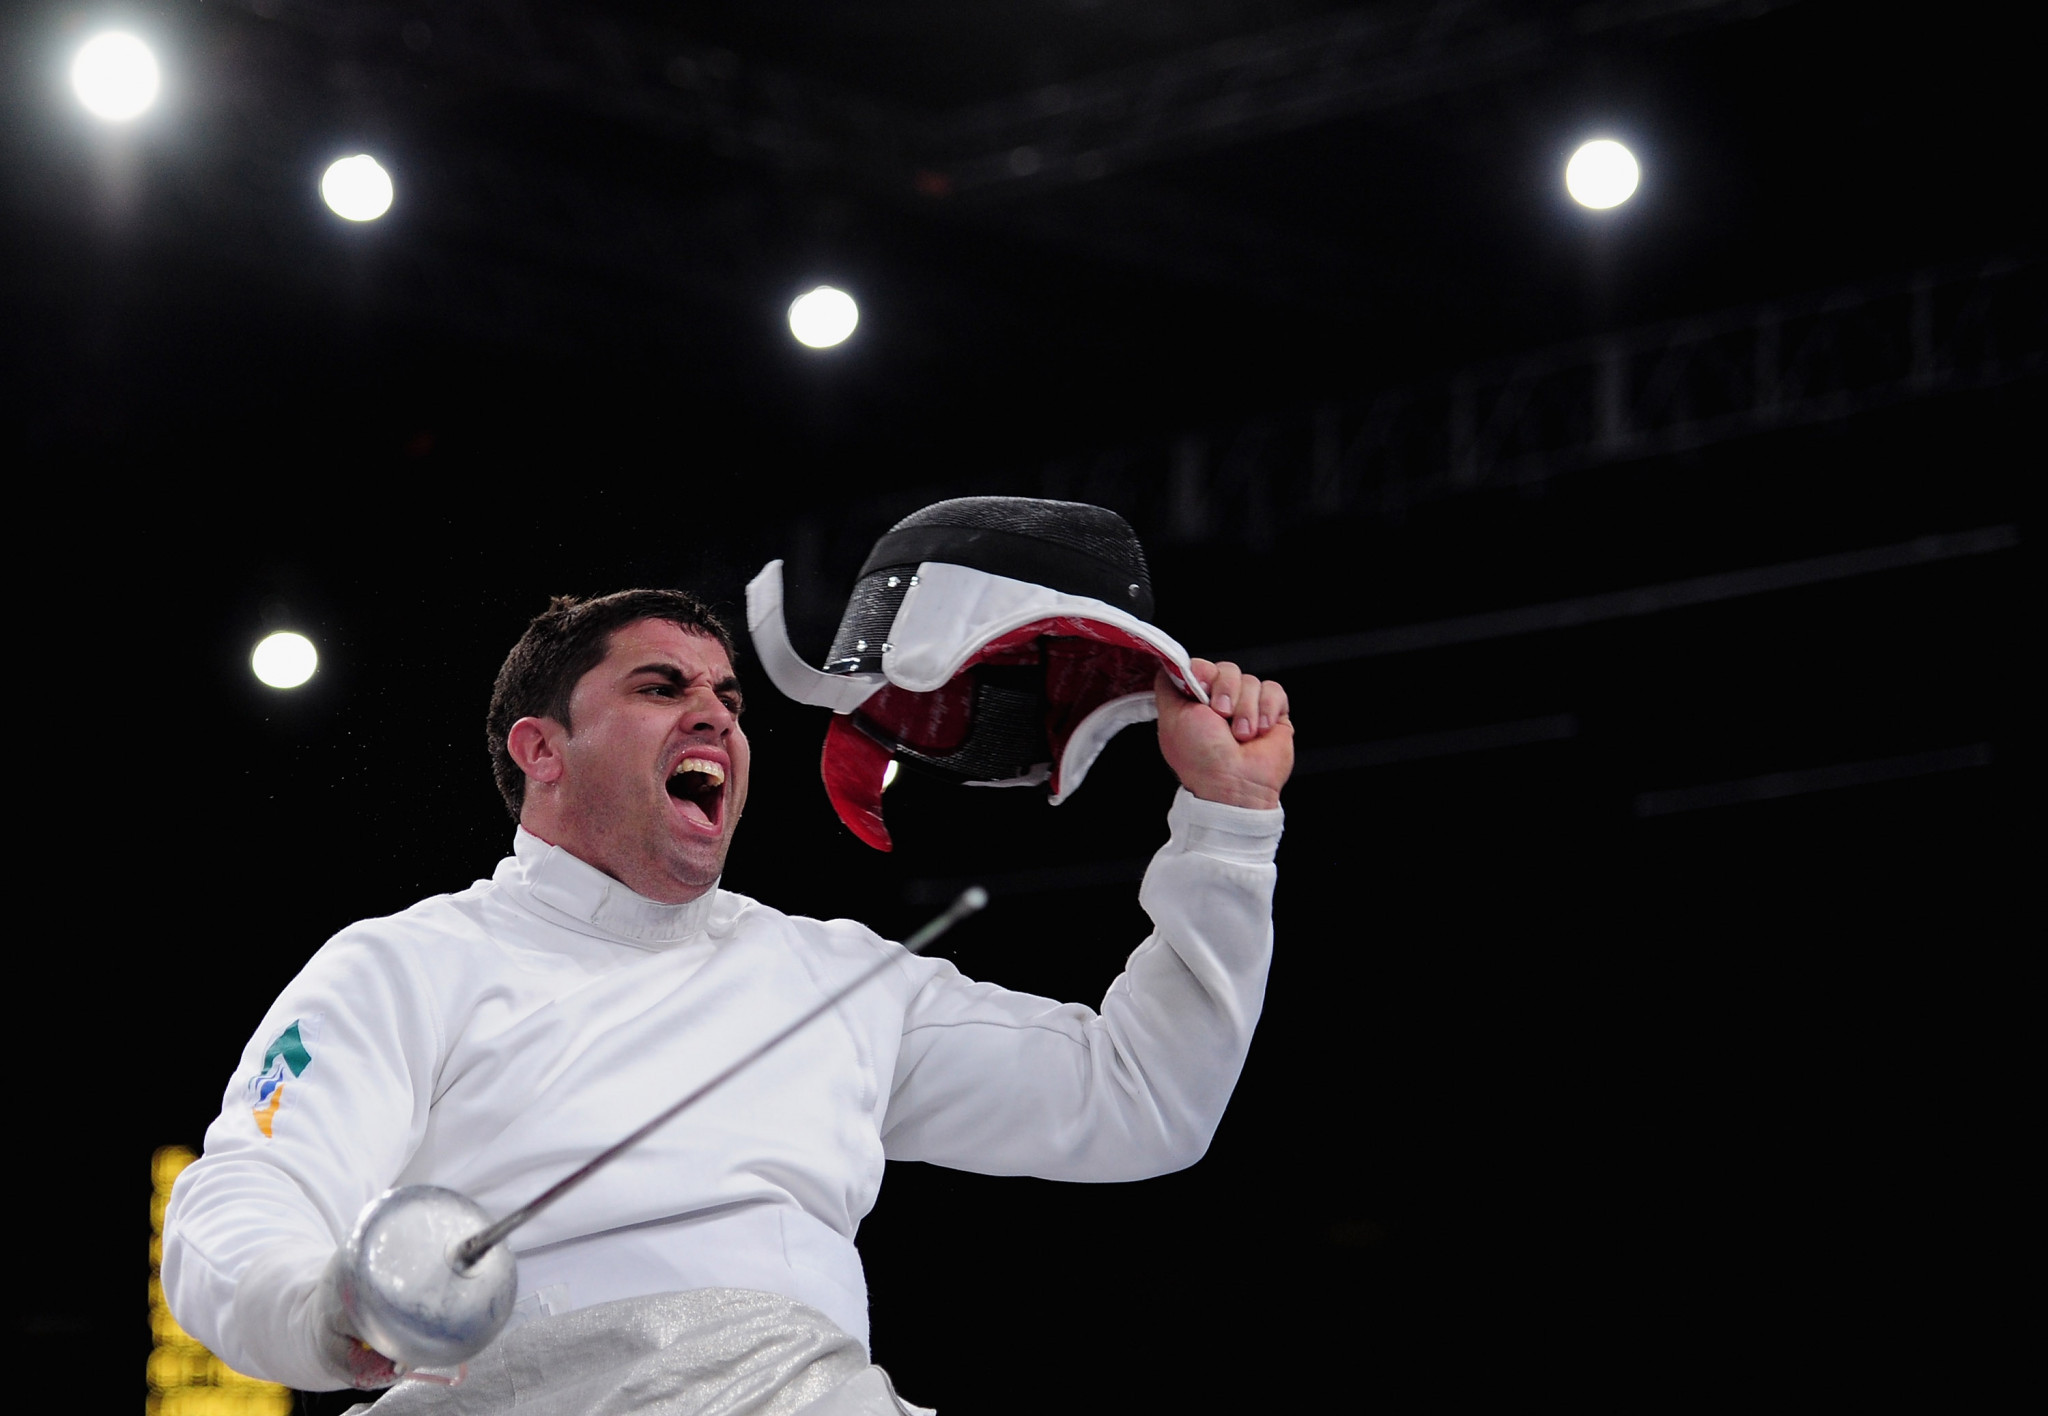 London 2012 Paralympic champion Jovane Guissone leads hosts Brazil's hopes in the men's épée B in São Paulo ©Getty Images